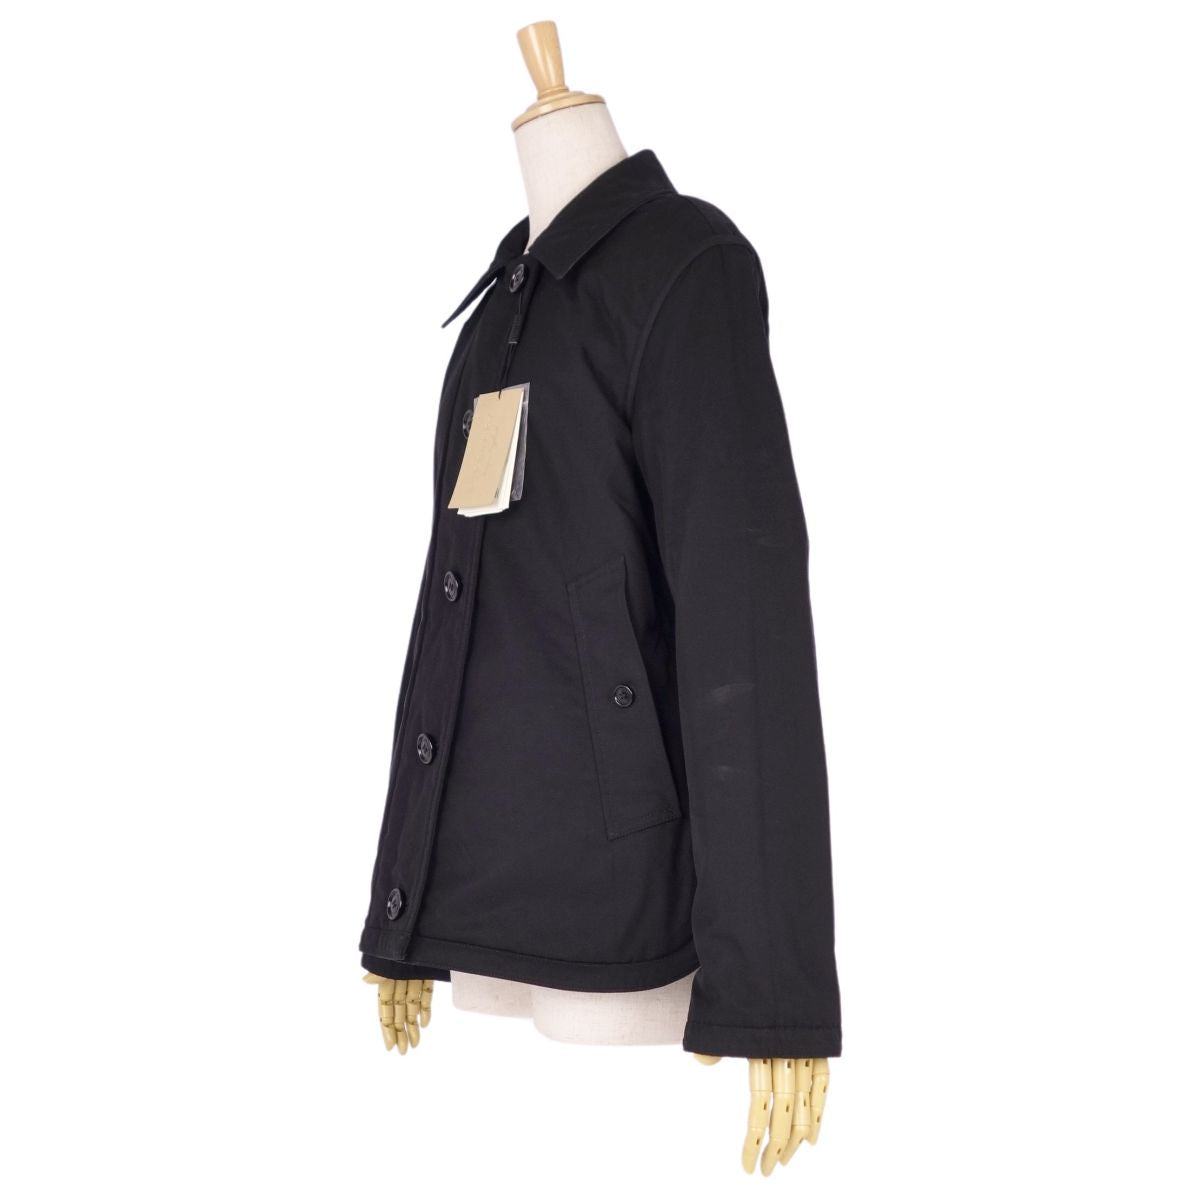 Burberry  Jacket Reverseible Cotton   36 (S equivalent) Black/Navy   LORD  s